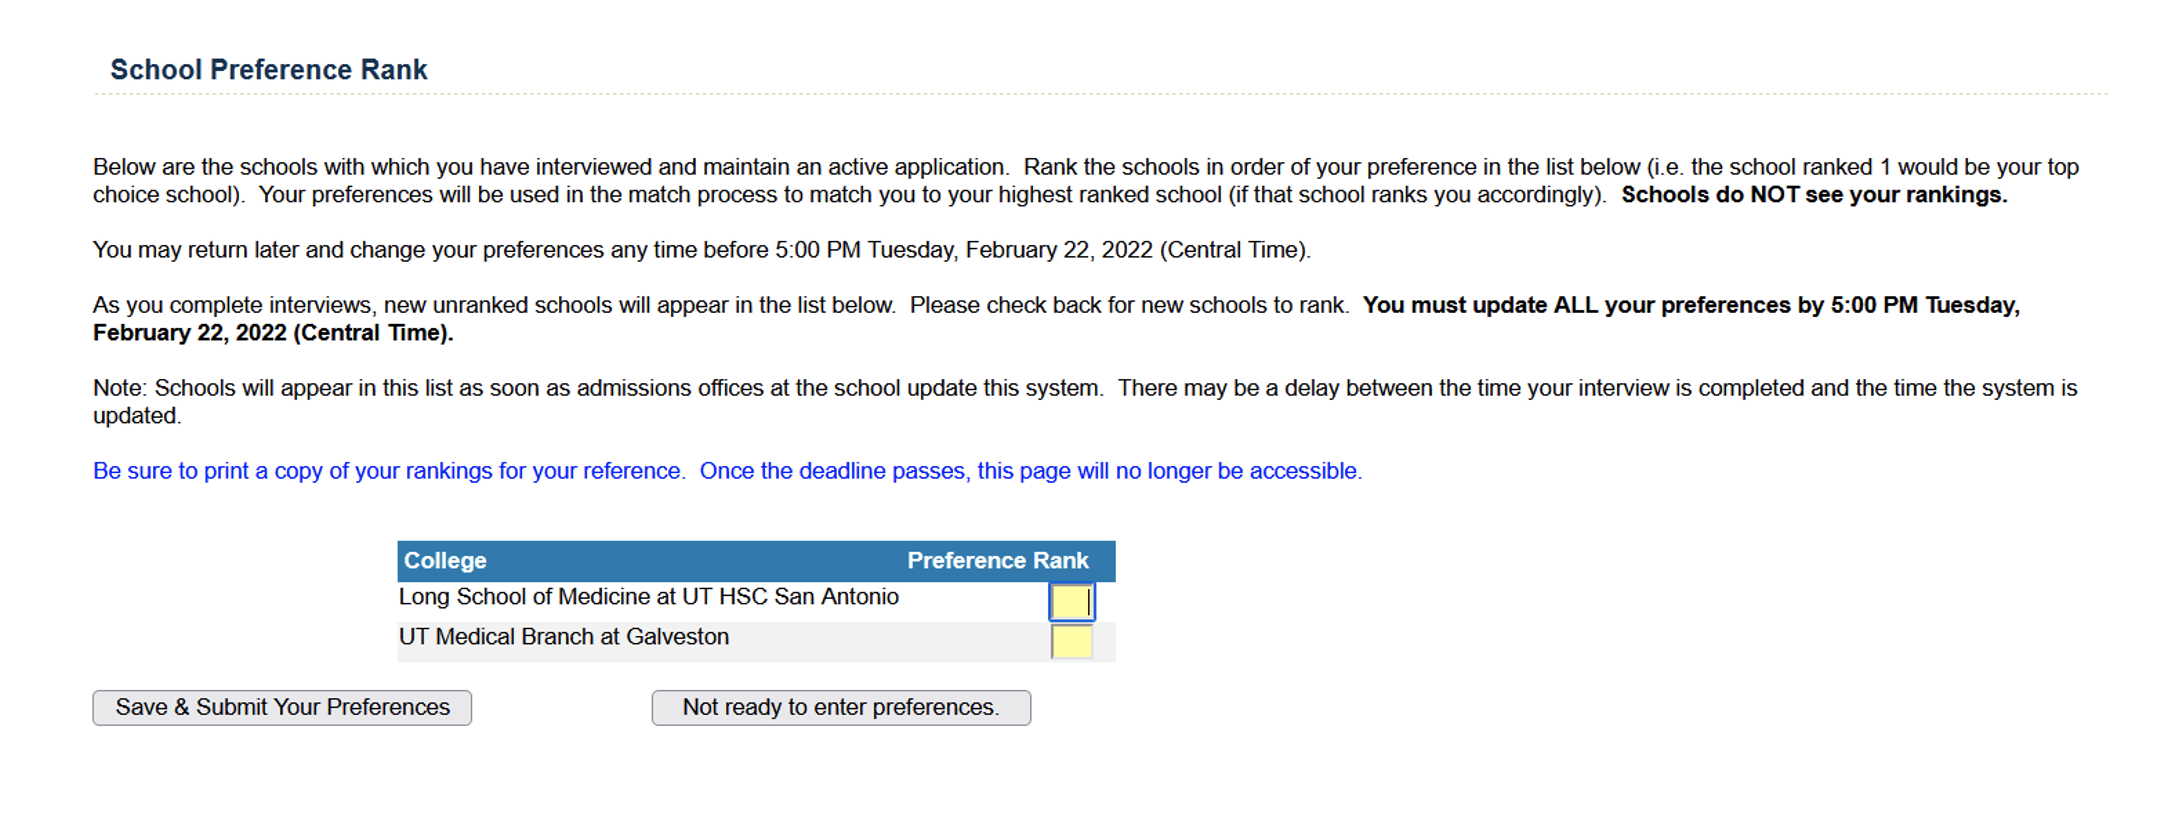 Schools will appear on your list as soon as their admissions offices update this system.